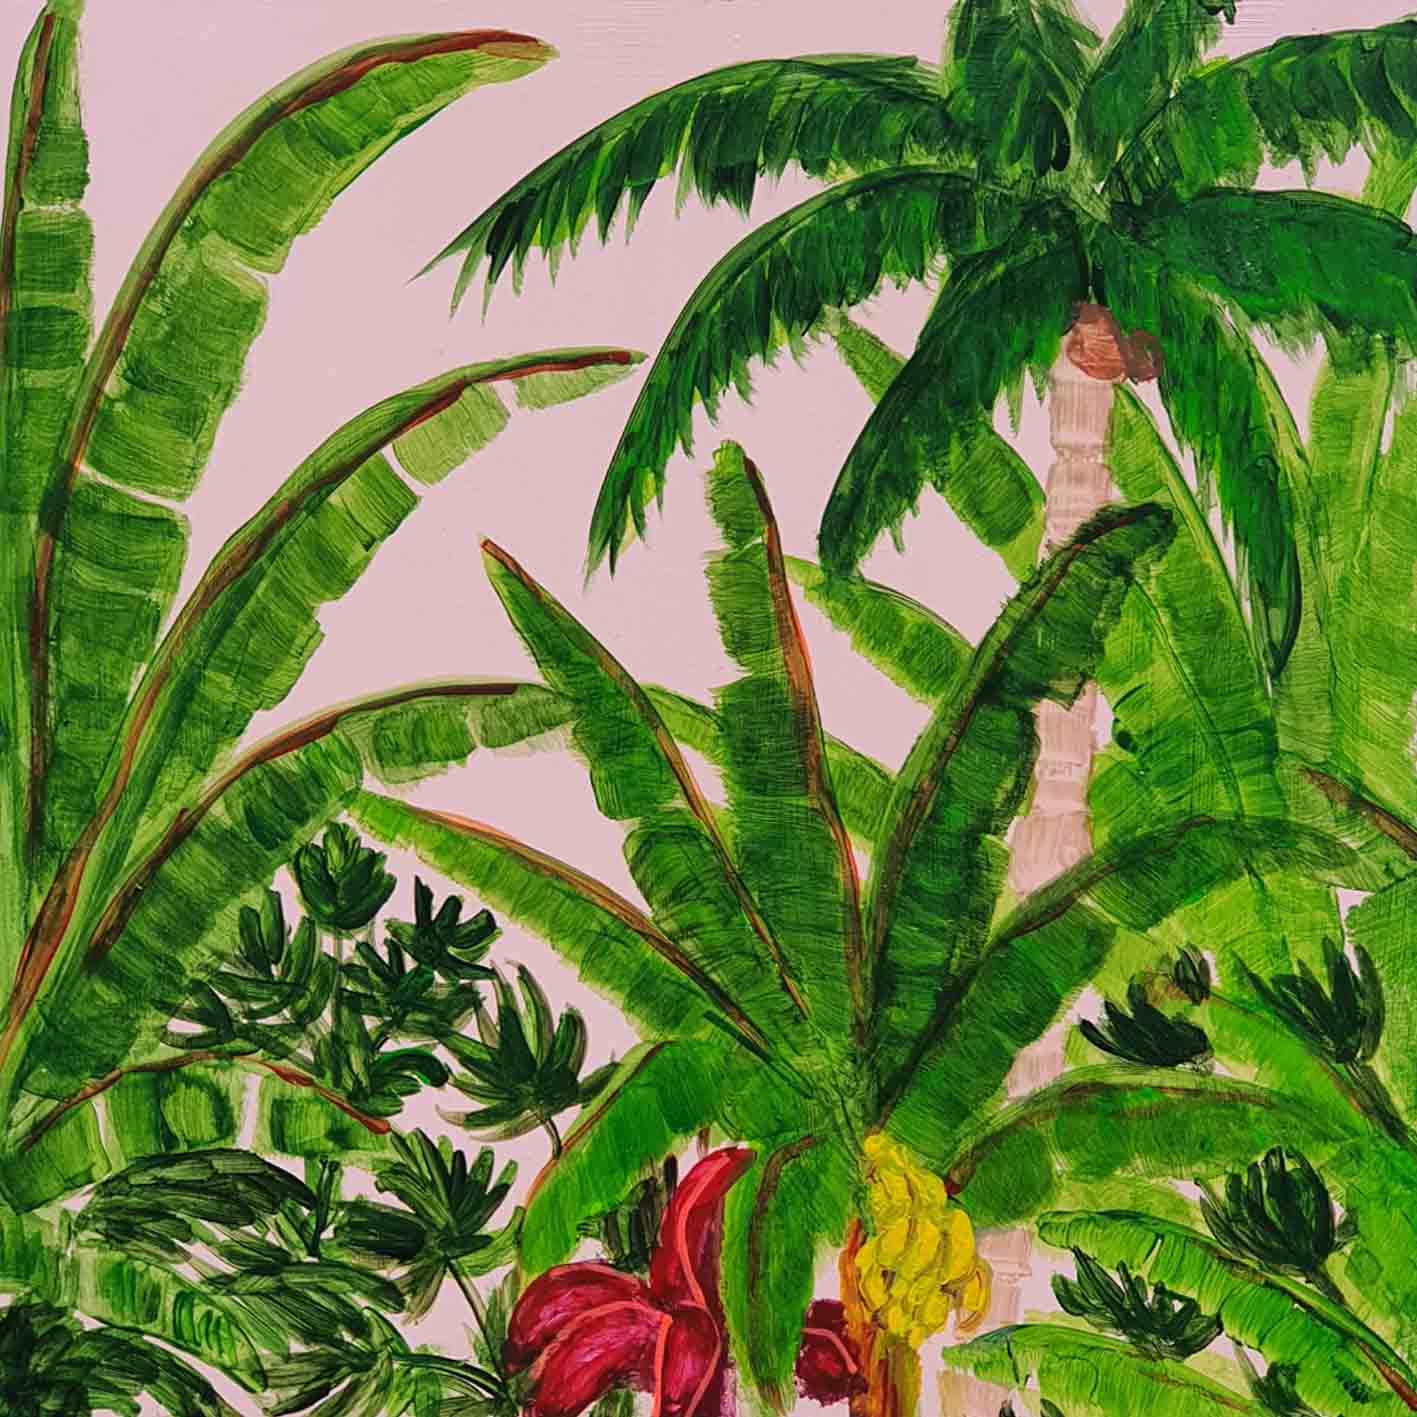 Tropical Fruit (sold)